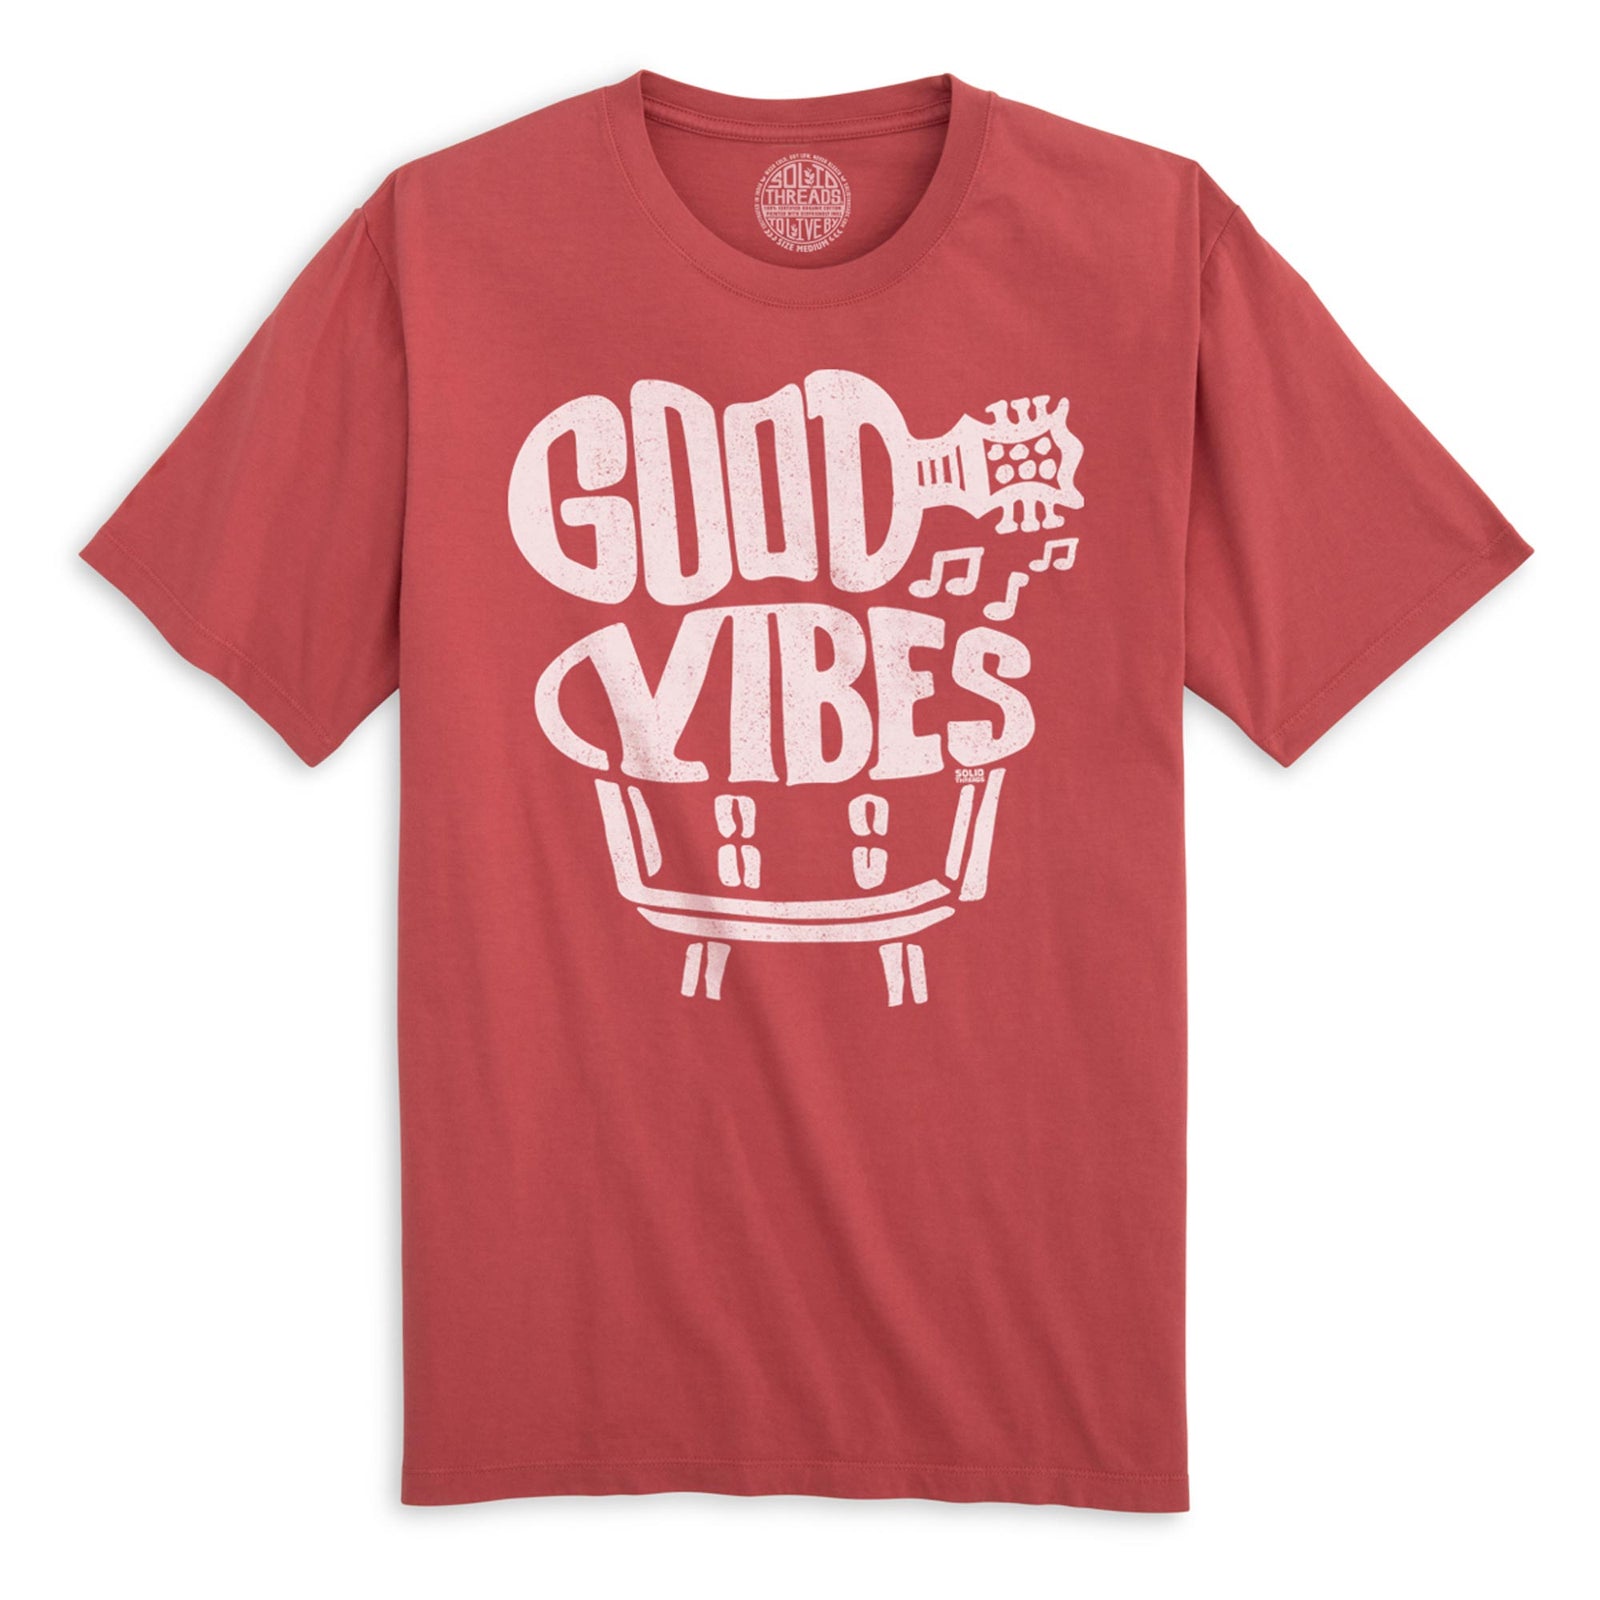 Good Vibes Cool Organic Cotton T-shirt | Vintage Music Festival  Tee | Solid Threads